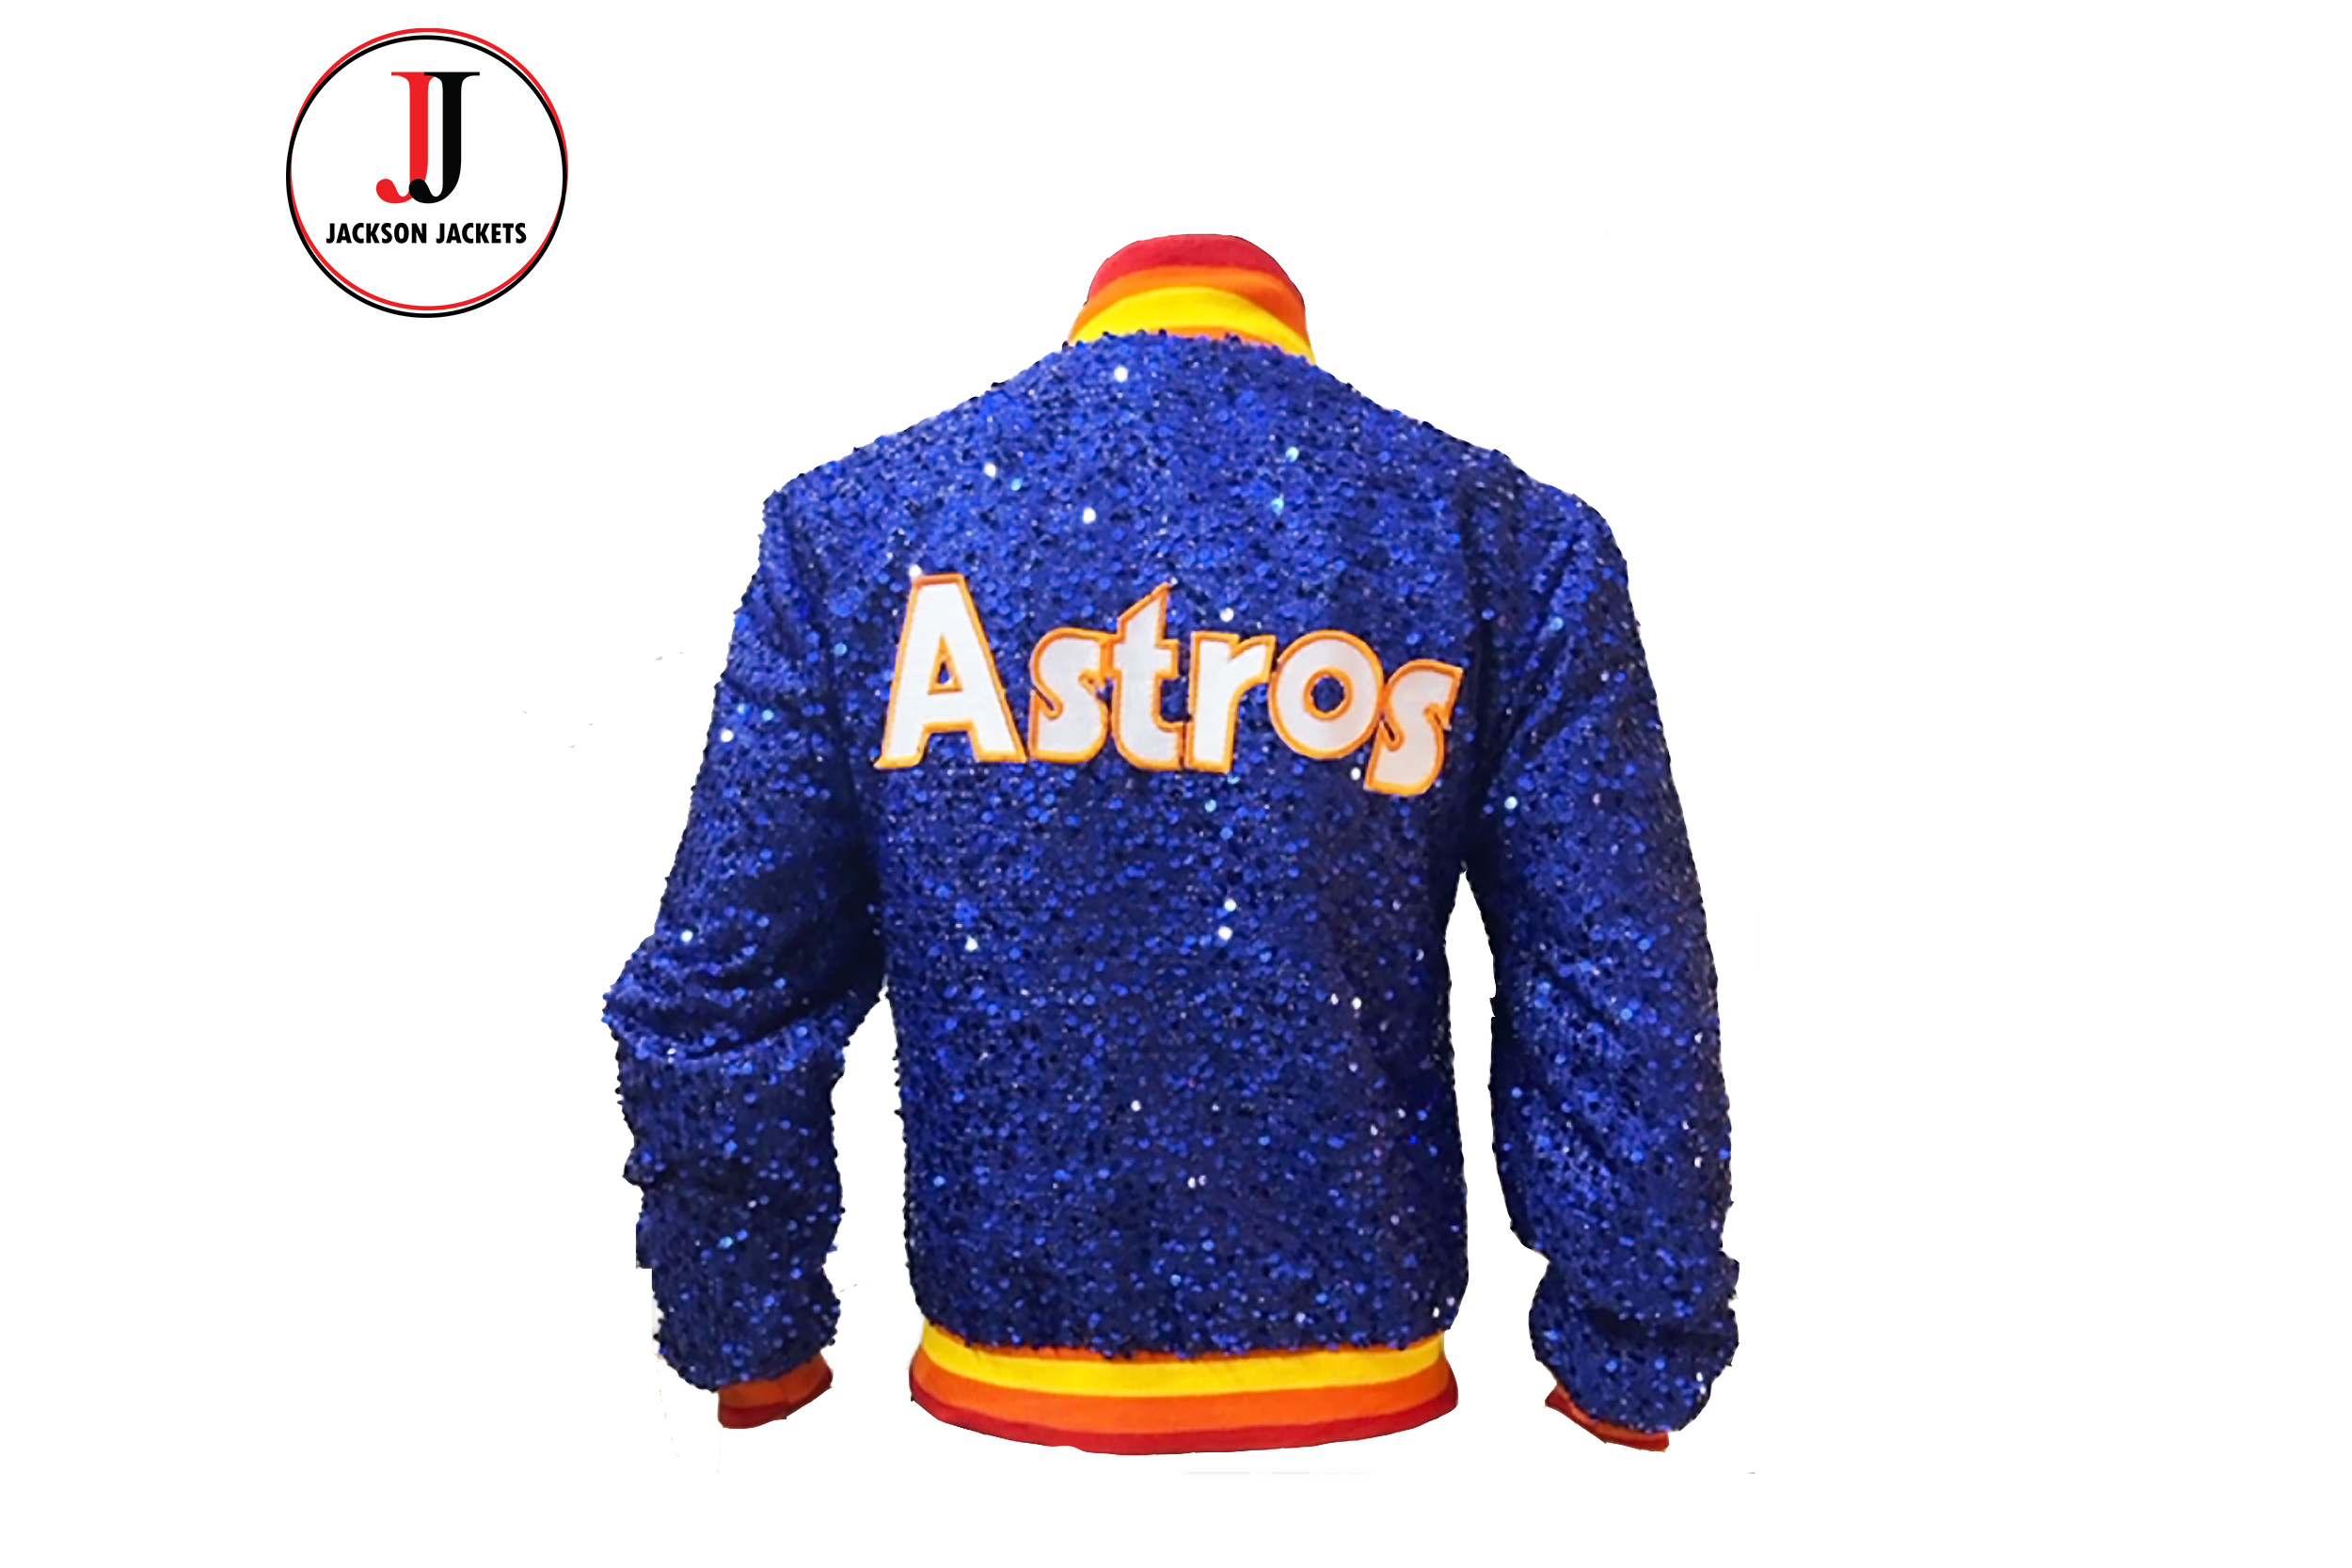 and ness astros jacket